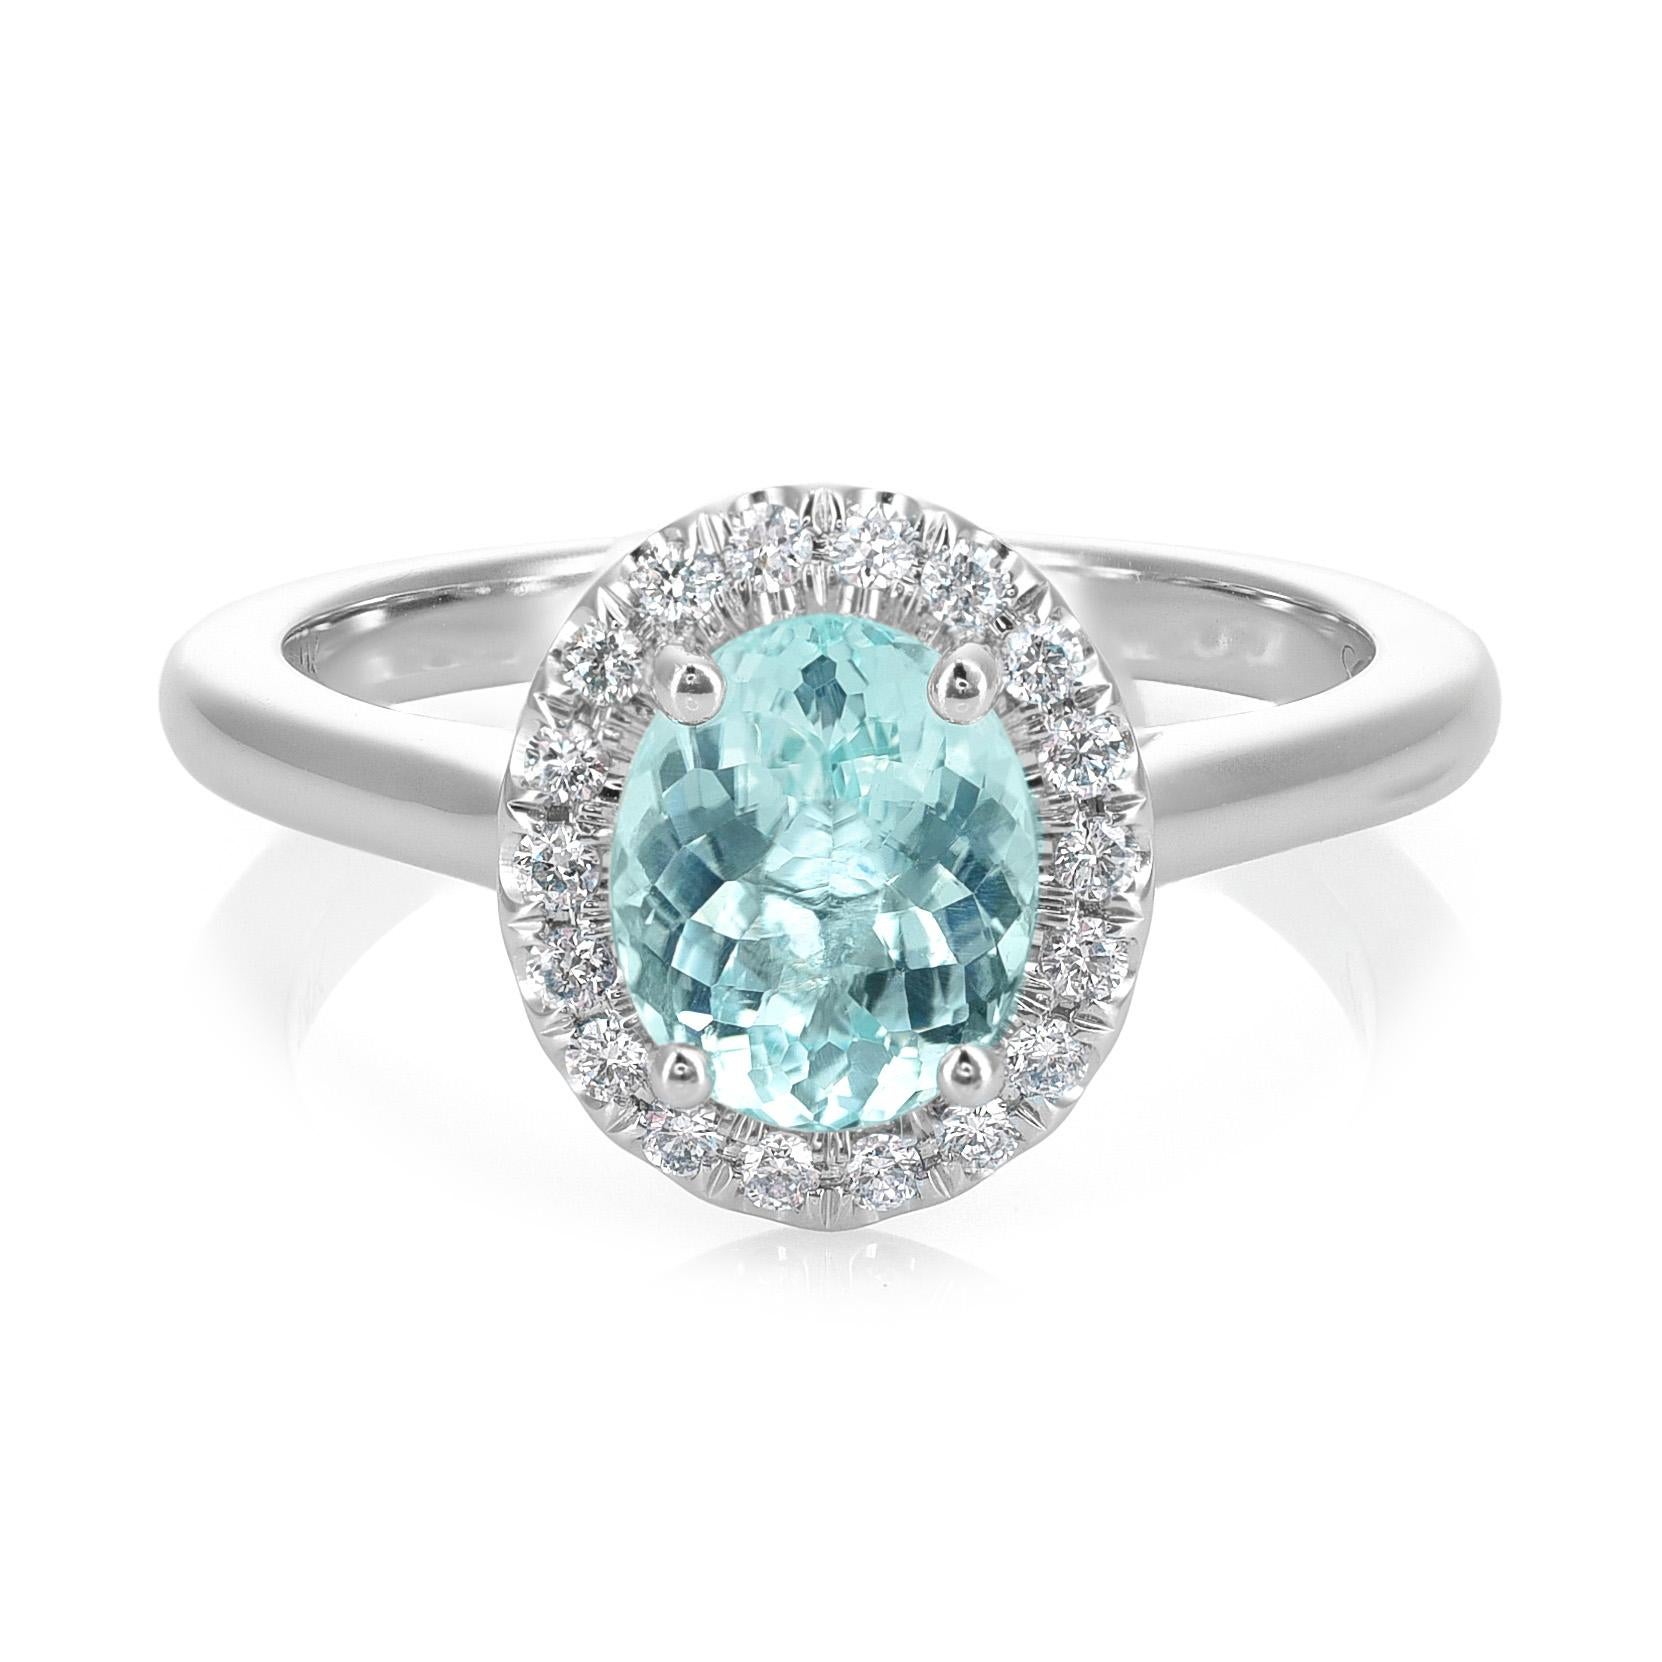 0.67 Carats Paraiba Tourmaline Diamonds set in 14K White Gold Ring In New Condition For Sale In Los Angeles, CA